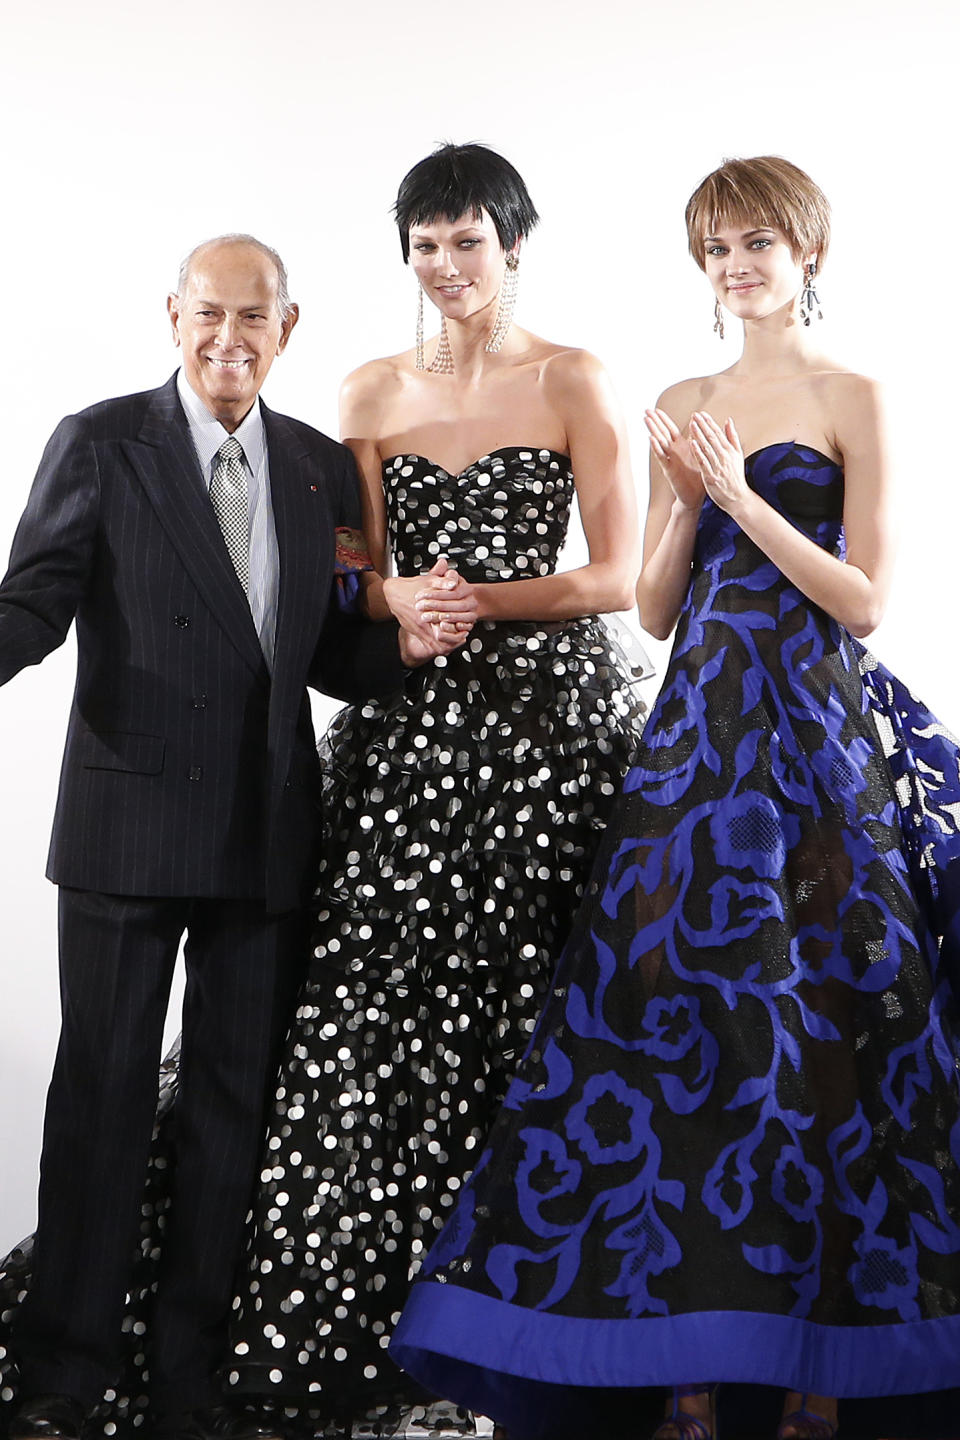 Designer Oscar de la Renta acknowledges the audience after his Fall 2014 collection show during Fashion Week in New York, Tuesday, Feb. 11, 2014. (AP Photo/Jason DeCrow)